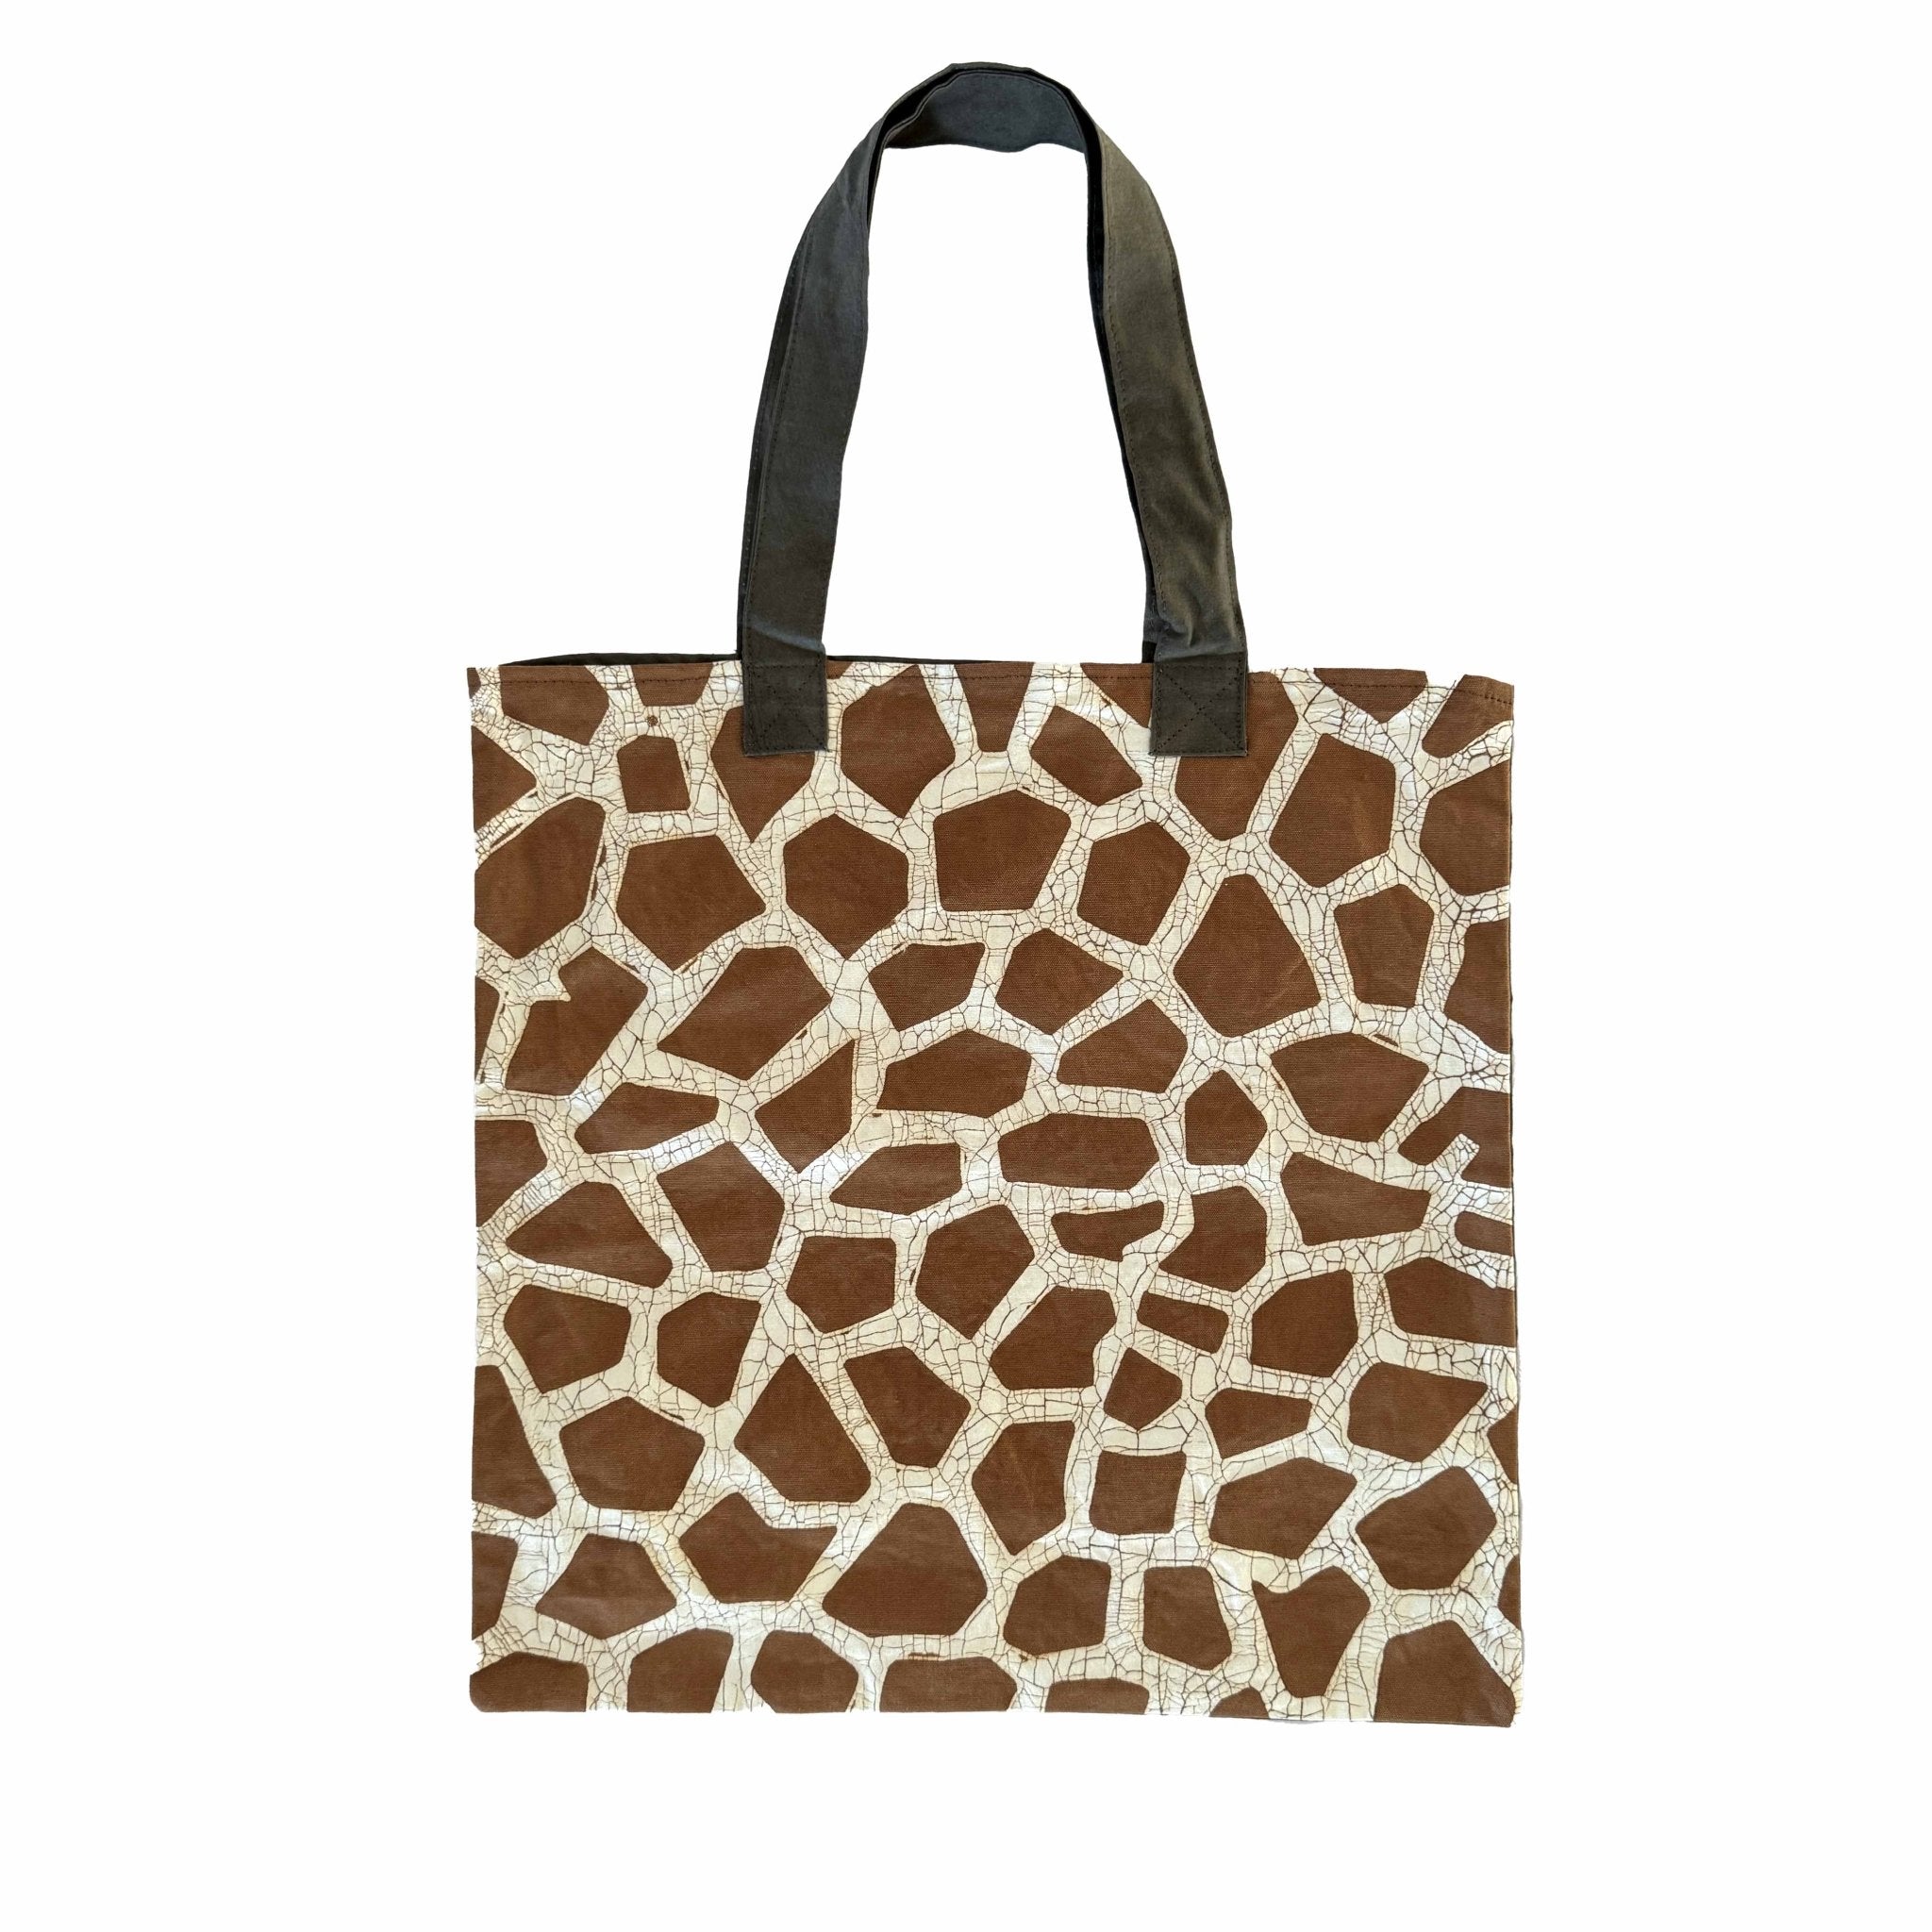 Mkupo Giraffe Print Tote Bag - Accessories by TRIBAL TEXTILES - Handcrafted Home Decor Interiors - African Made